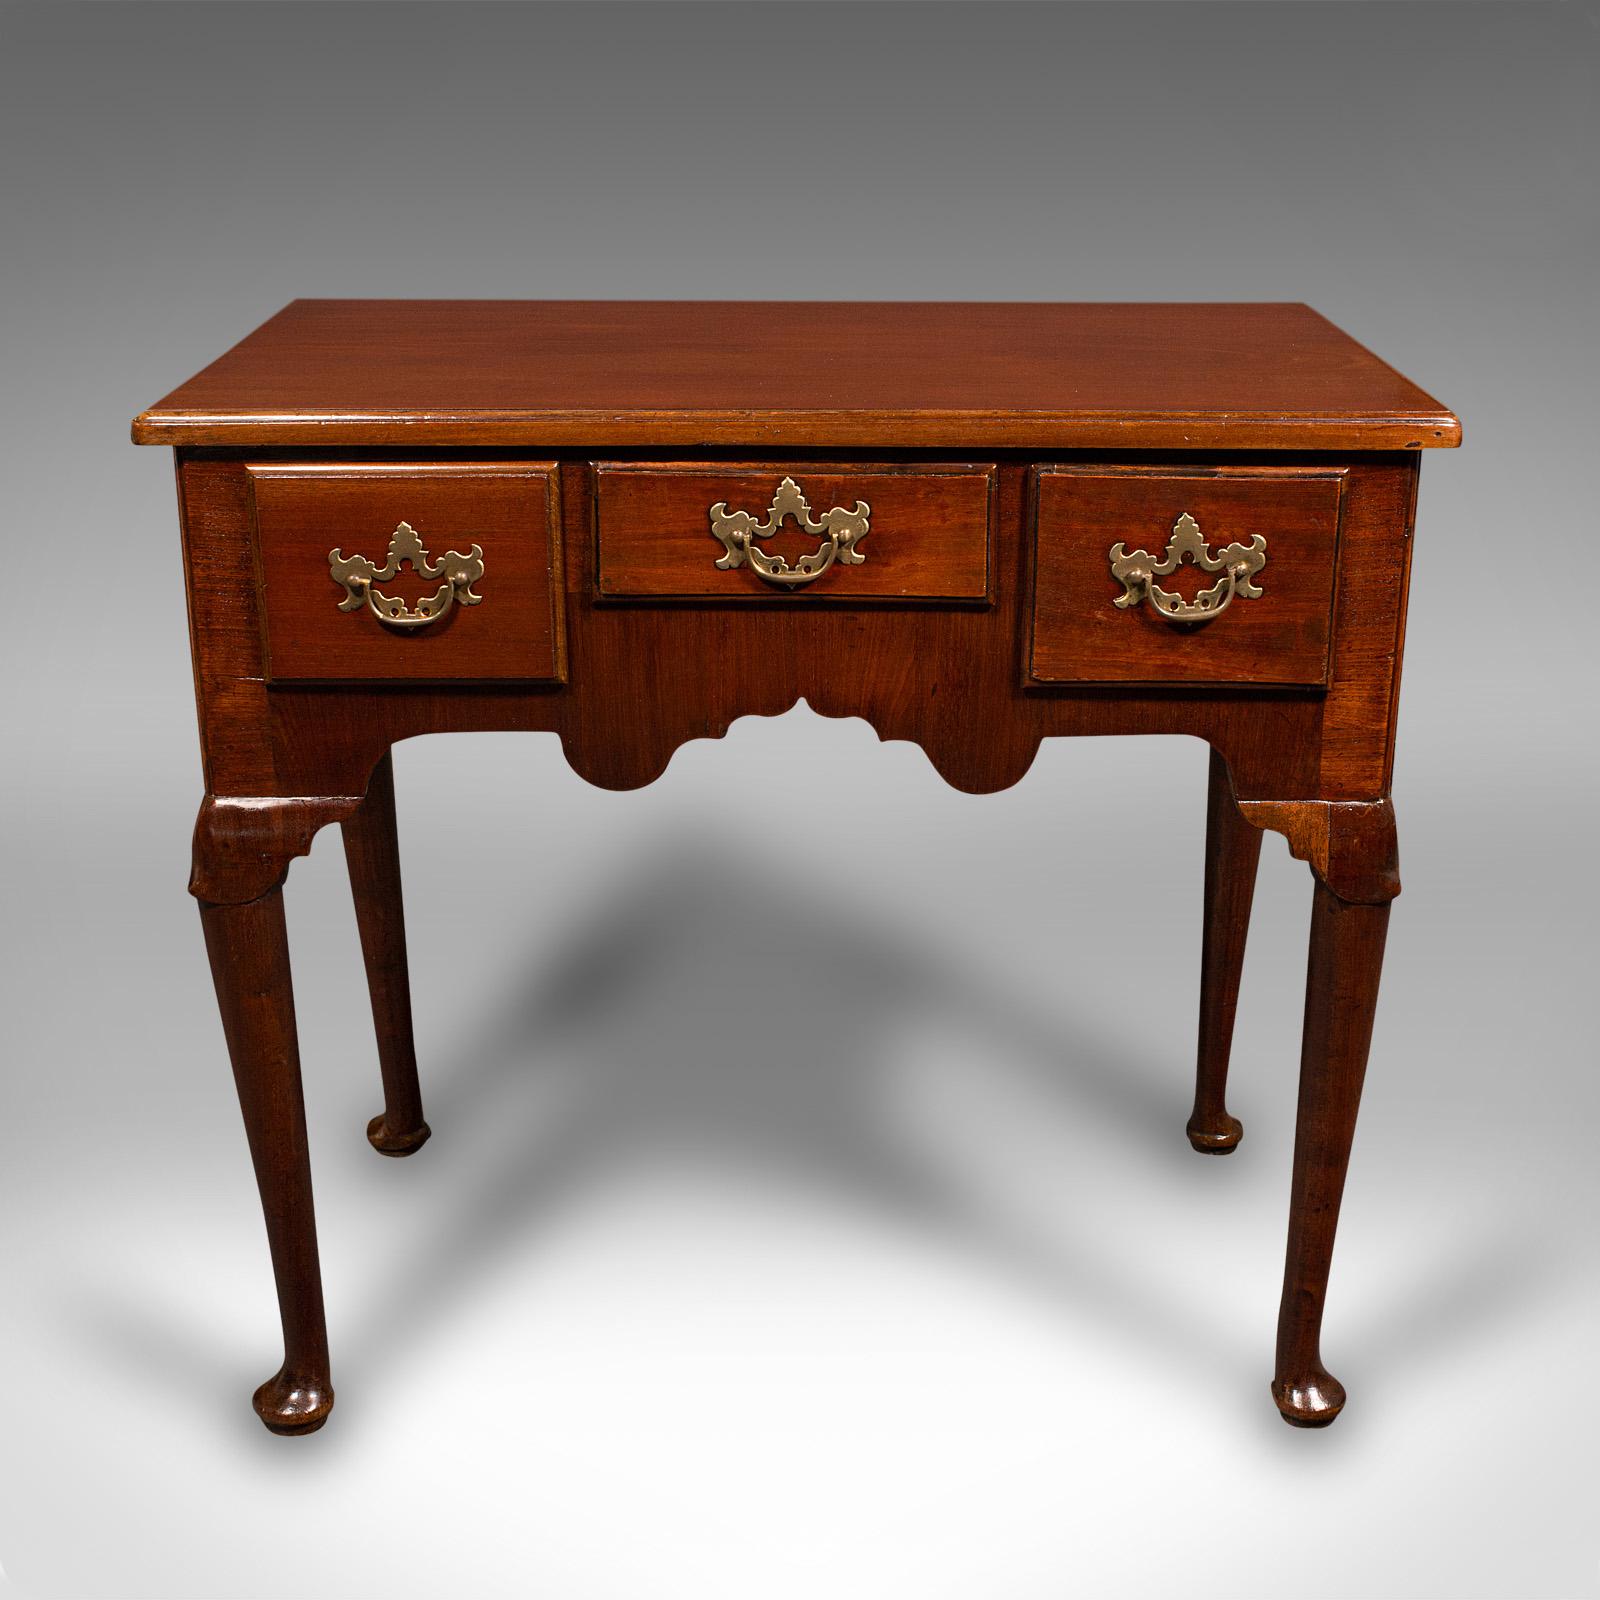 This is a small antique hall table. An English, mahogany and oak lowboy, dating to the Georgian period, circa 1780.

Appealing proportion and fine craftsmanship
Displaying a desirable aged patina and in good order
Select stocks offer fine grain